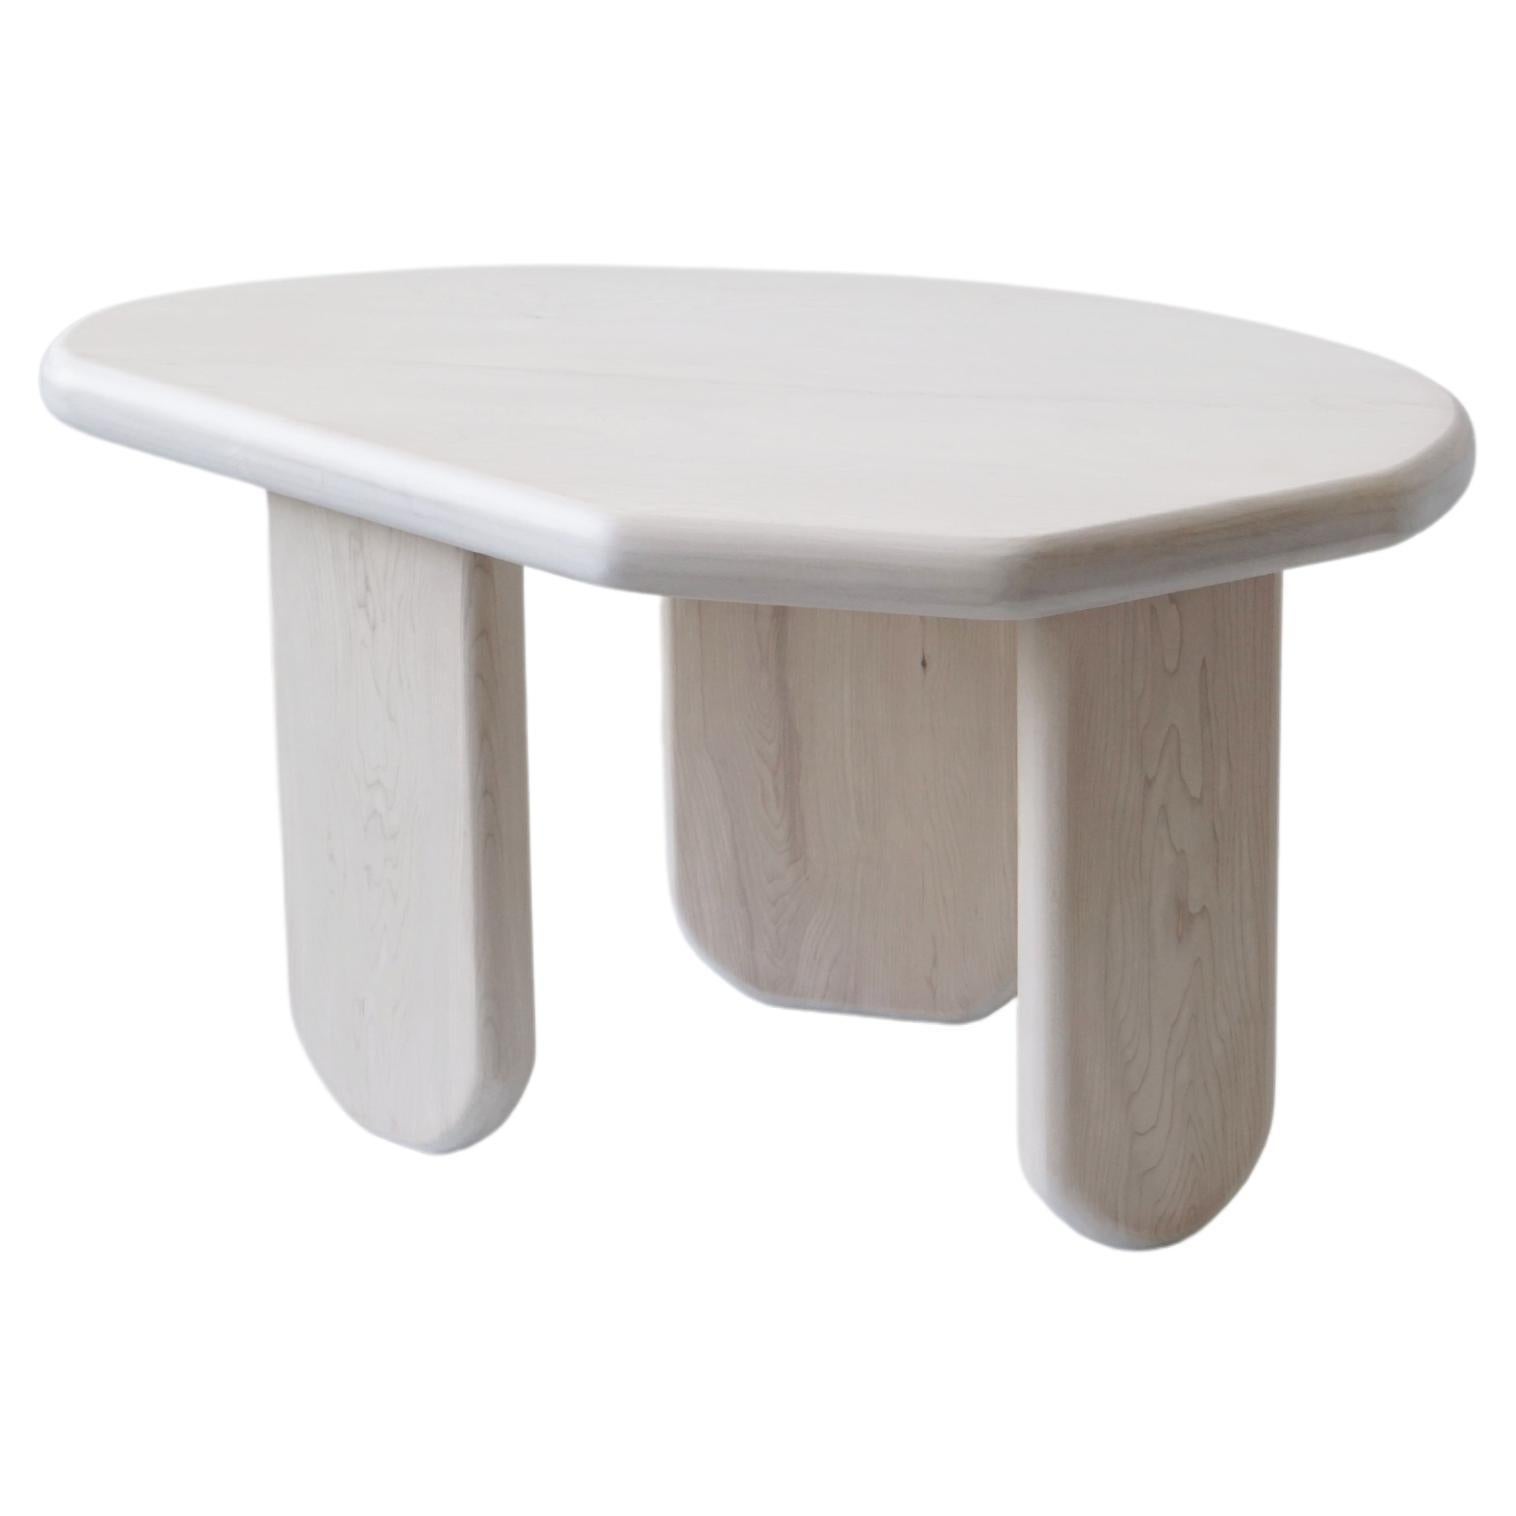 Bleached Maple Organic Shaped Table by Last Workshop, 2023 For Sale